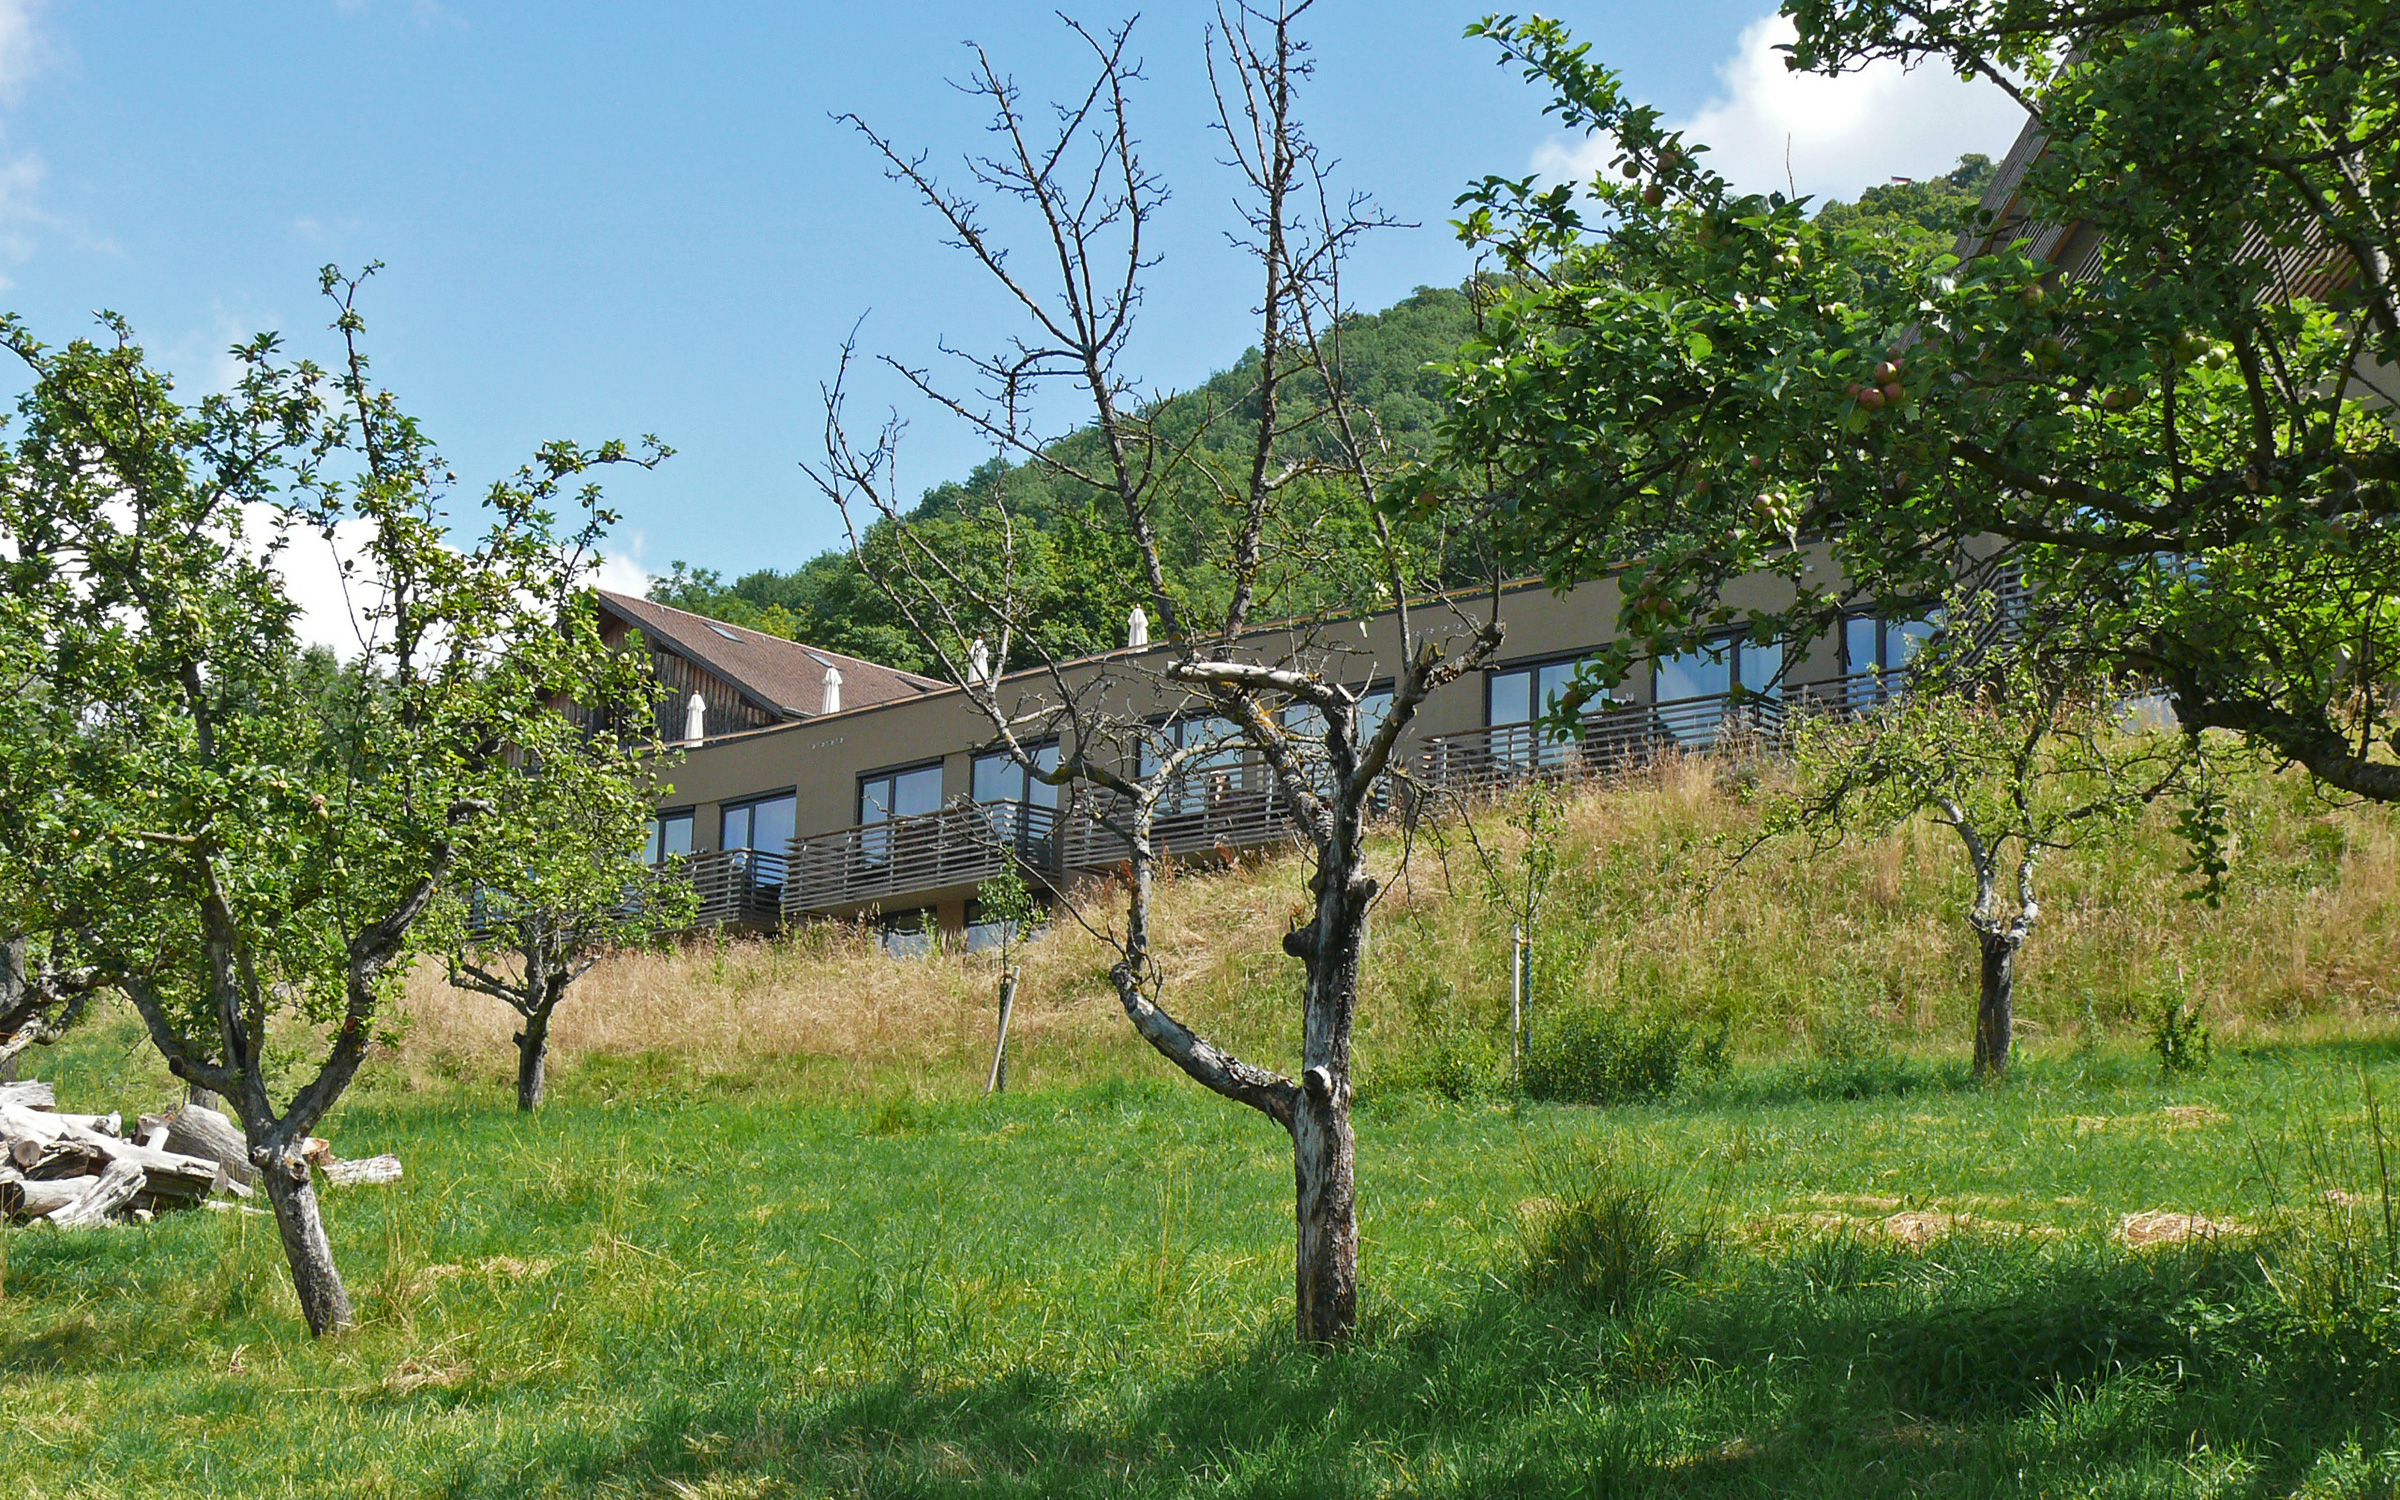 A meadow orchard in front of the building